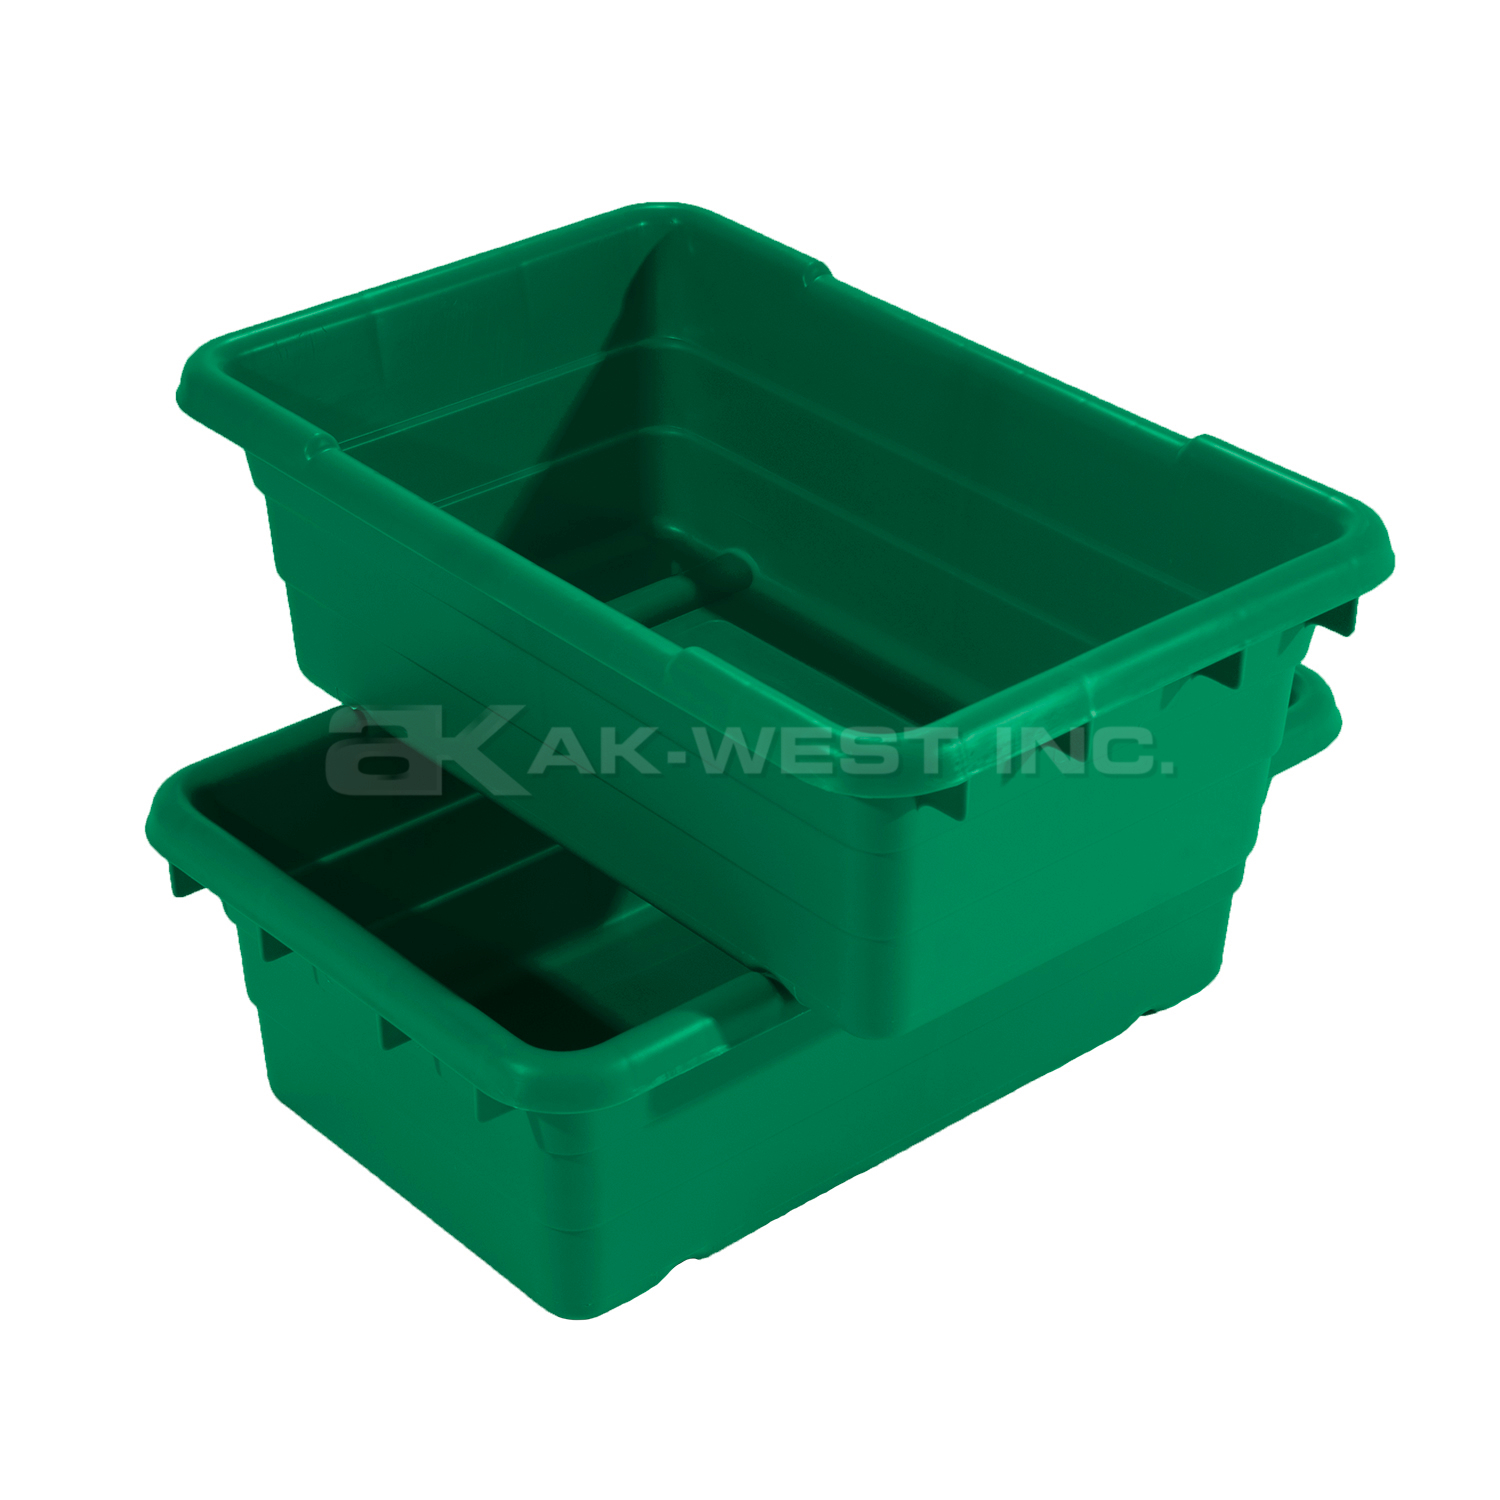 Green, 25" x 16" x 9", Jumbo Lug Cross Stack and Nest Container, Polypropylene Version